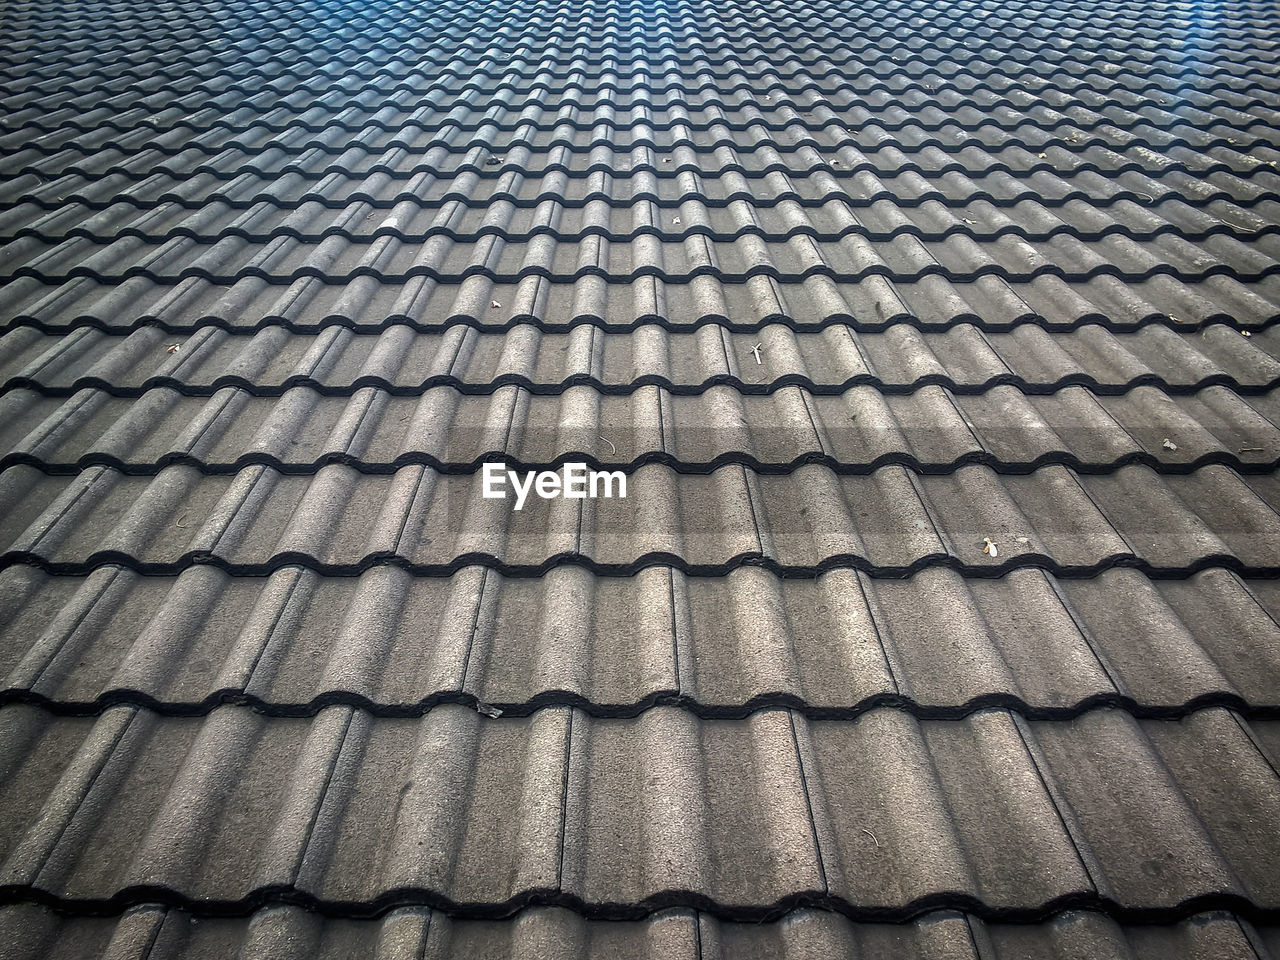 CLOSE-UP OF ROOF TILES